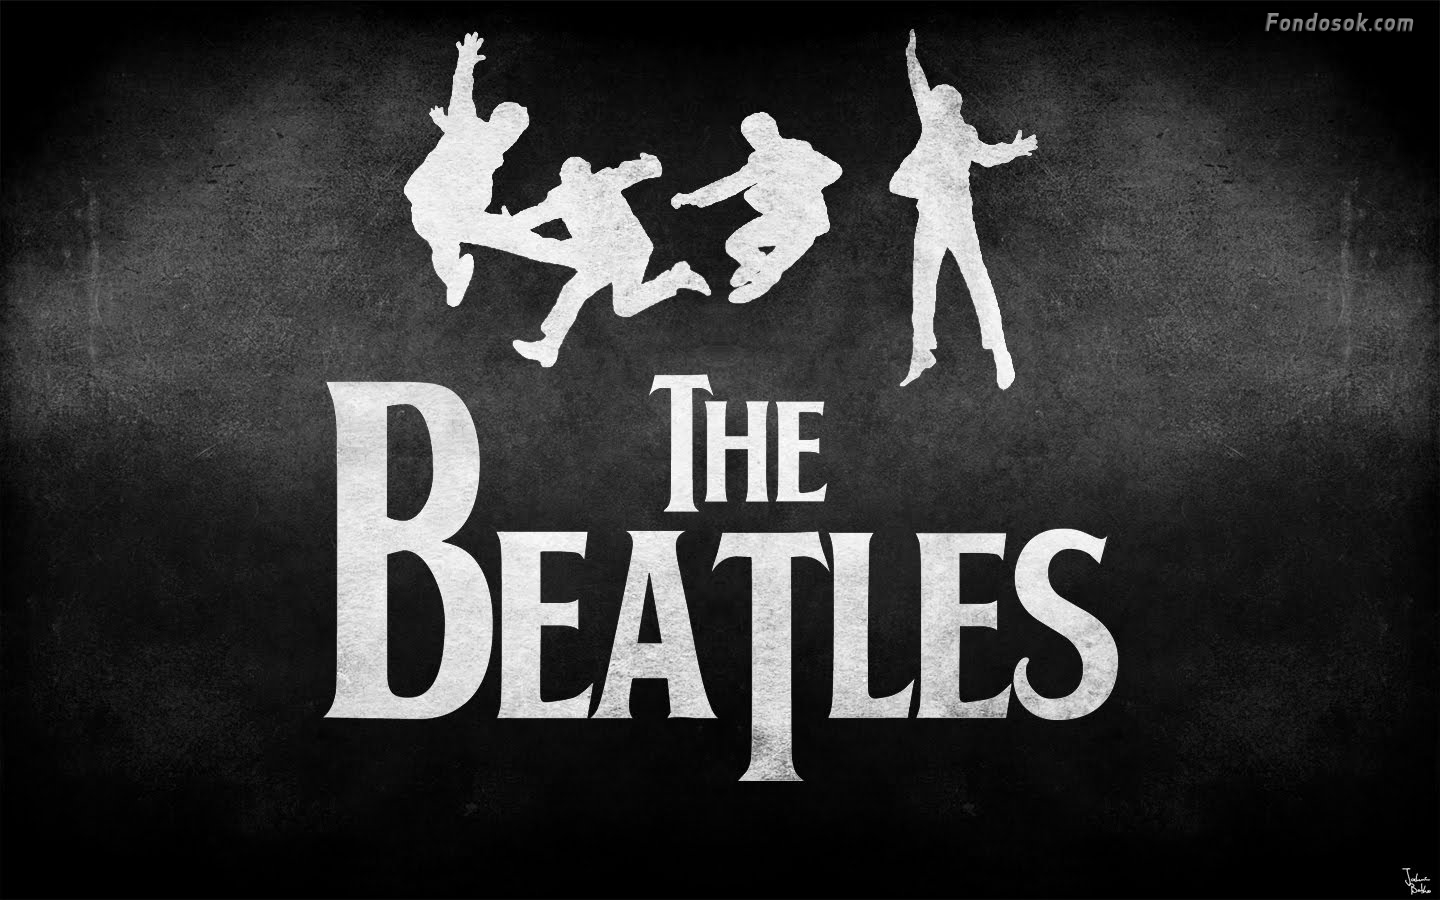 Free Download You Are Viewing The Beatles Wallpaper Widescreen Wallpaper 1440x900 For Your Desktop Mobile Tablet Explore 47 Beatles Wallpaper Widescreen The Beatles Wallpaper 1280x800 Hd Beatles Wallpaper Beatles Wallpaper Desktop